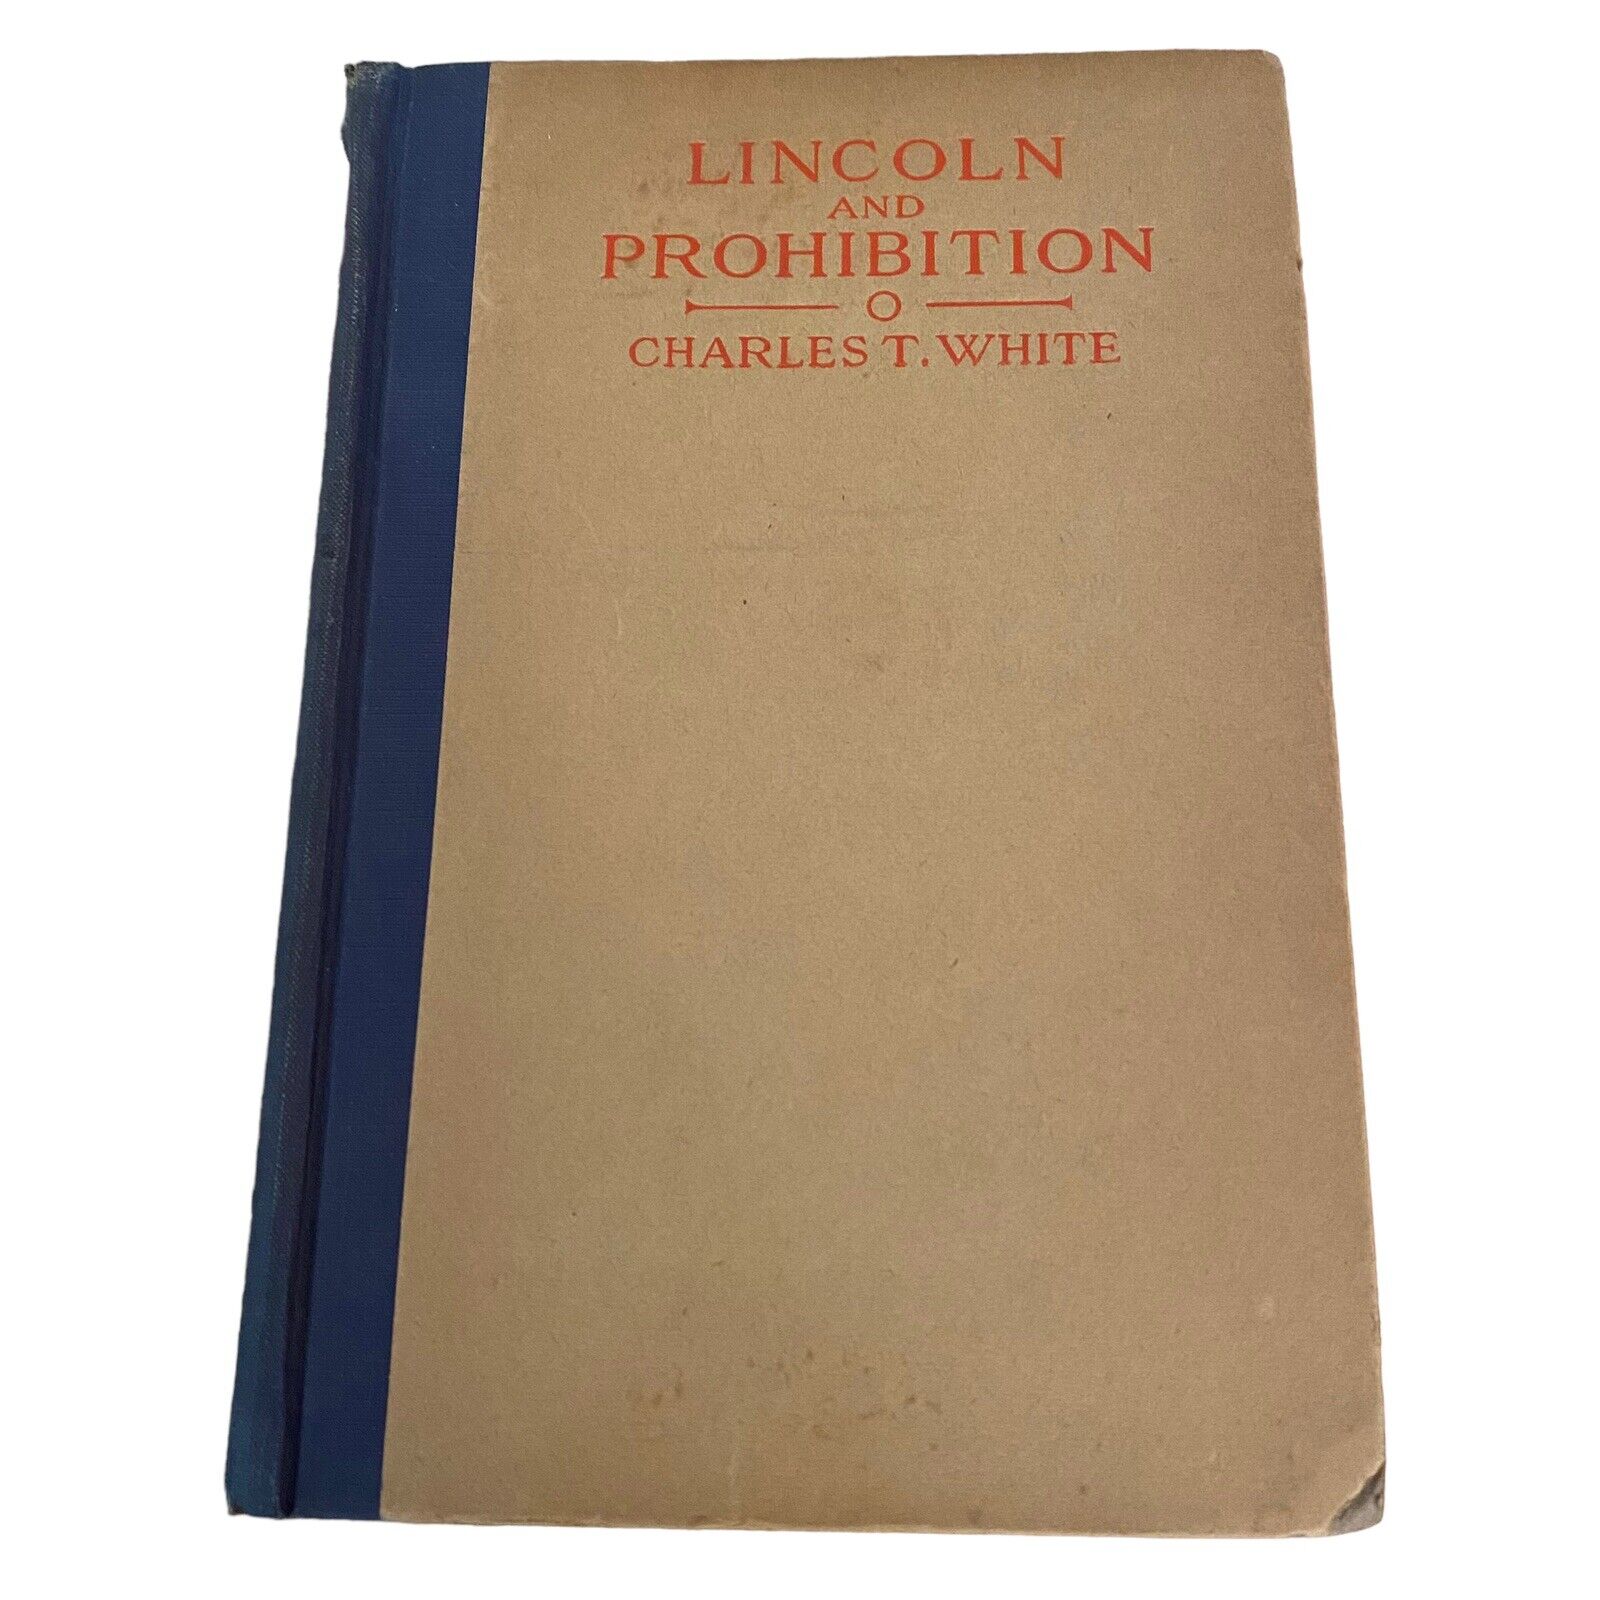 RARE Antique 1921 Lincoln and Prohibition By Charles T White 1st Edition EX Cond